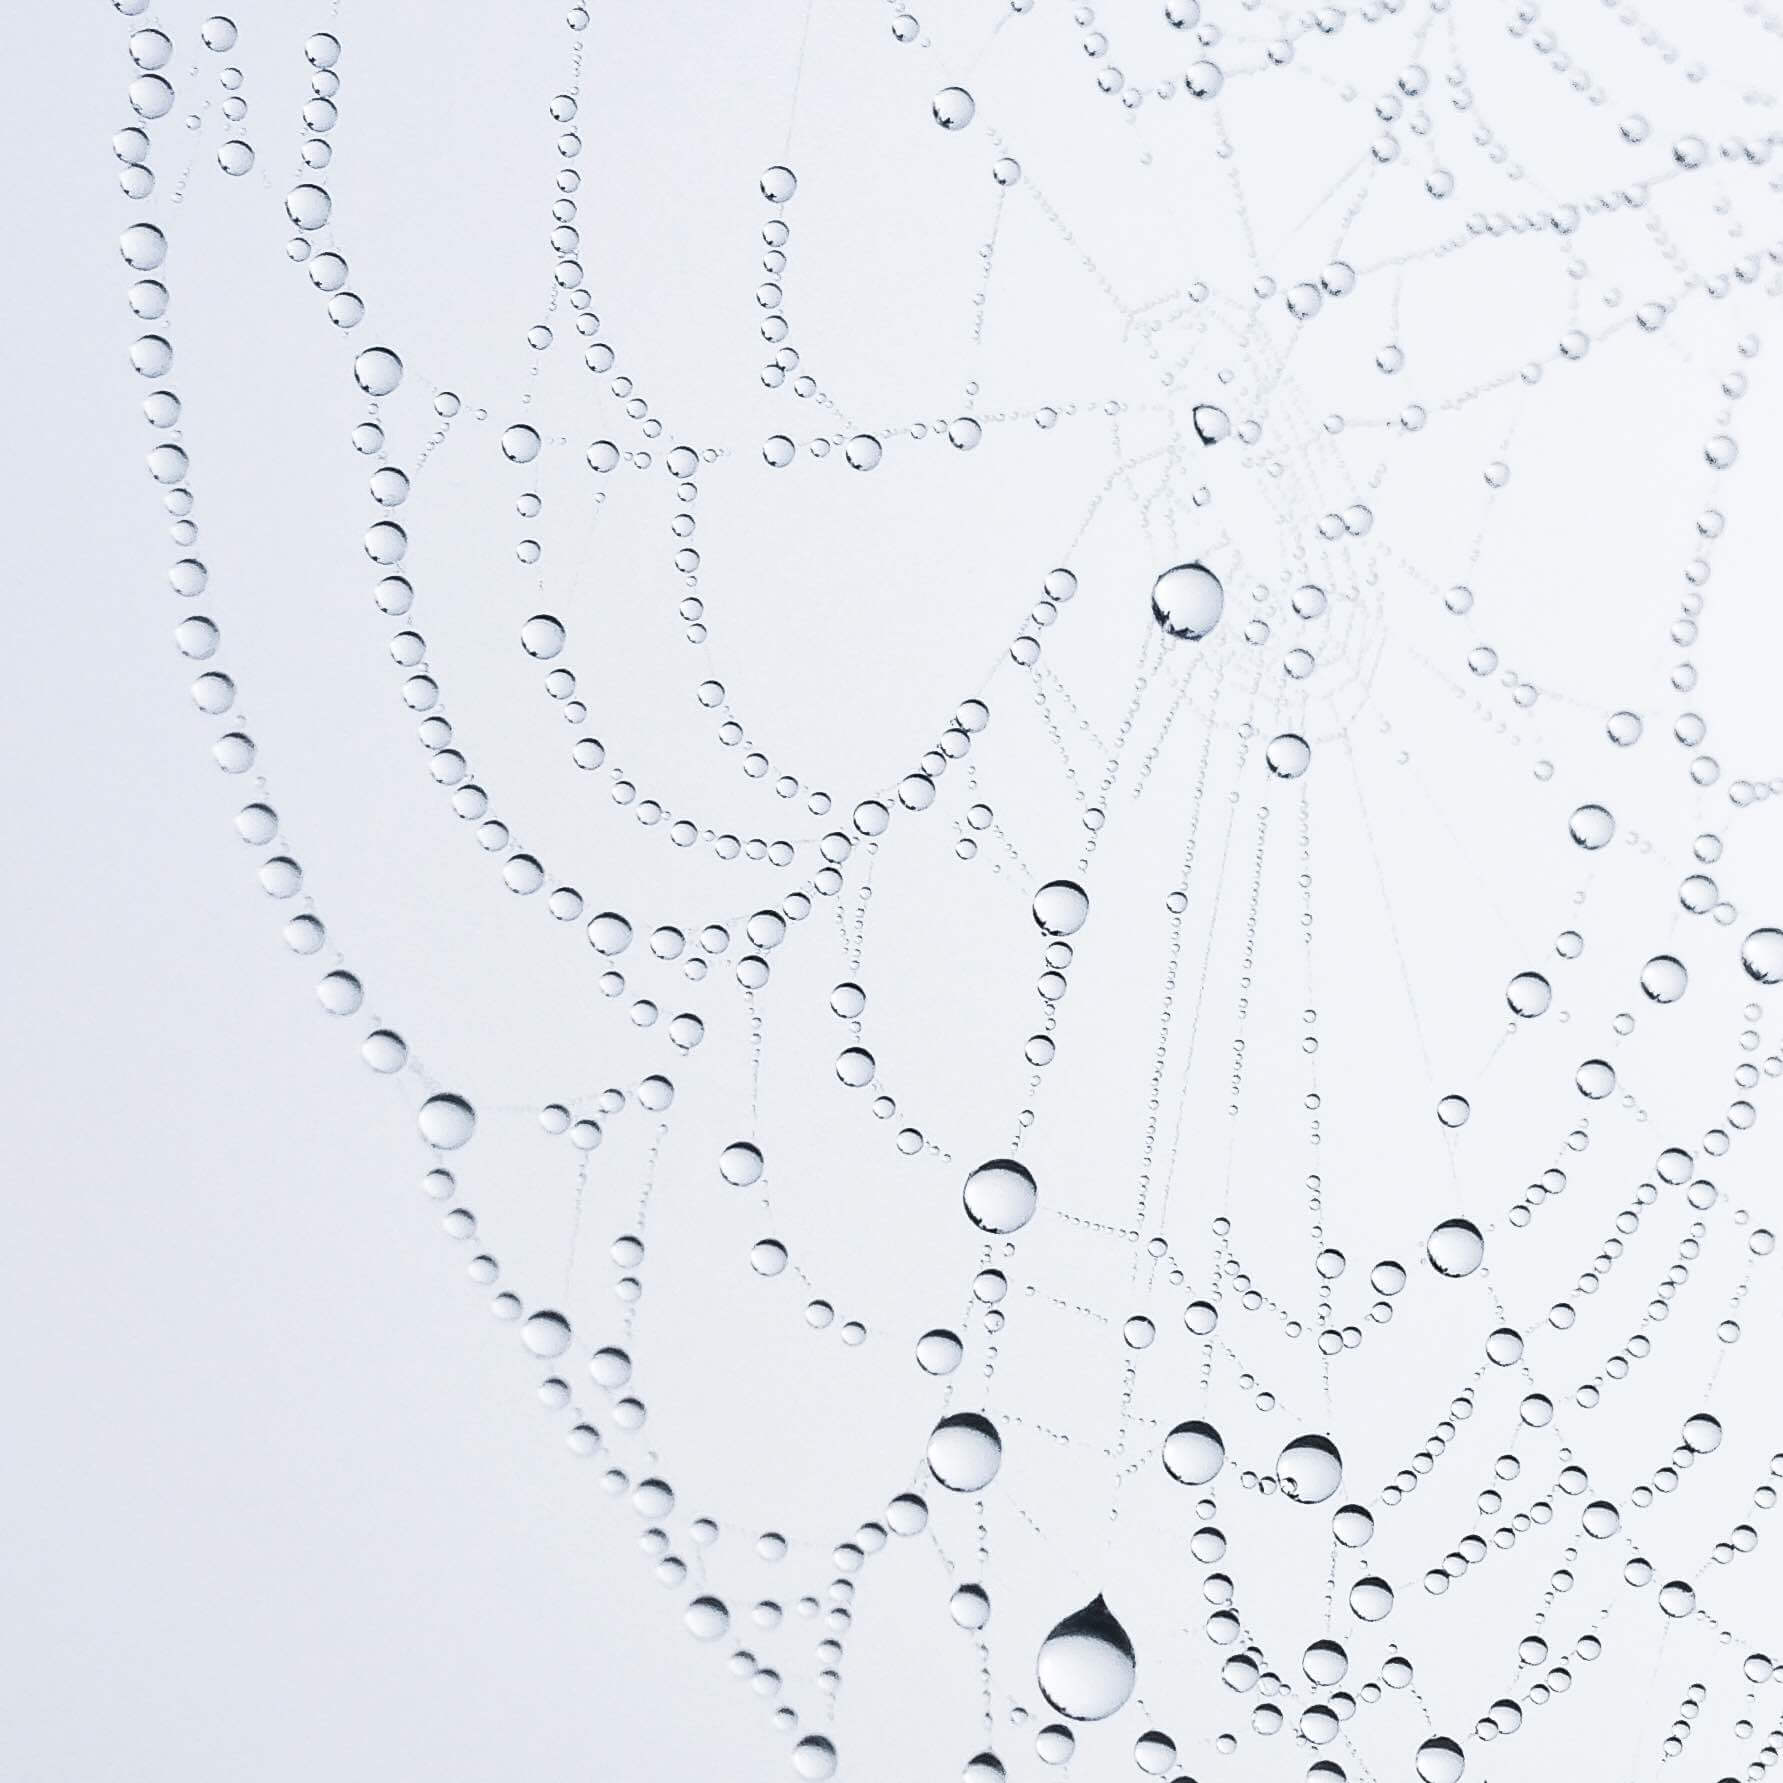 close up photo of web with water droplets